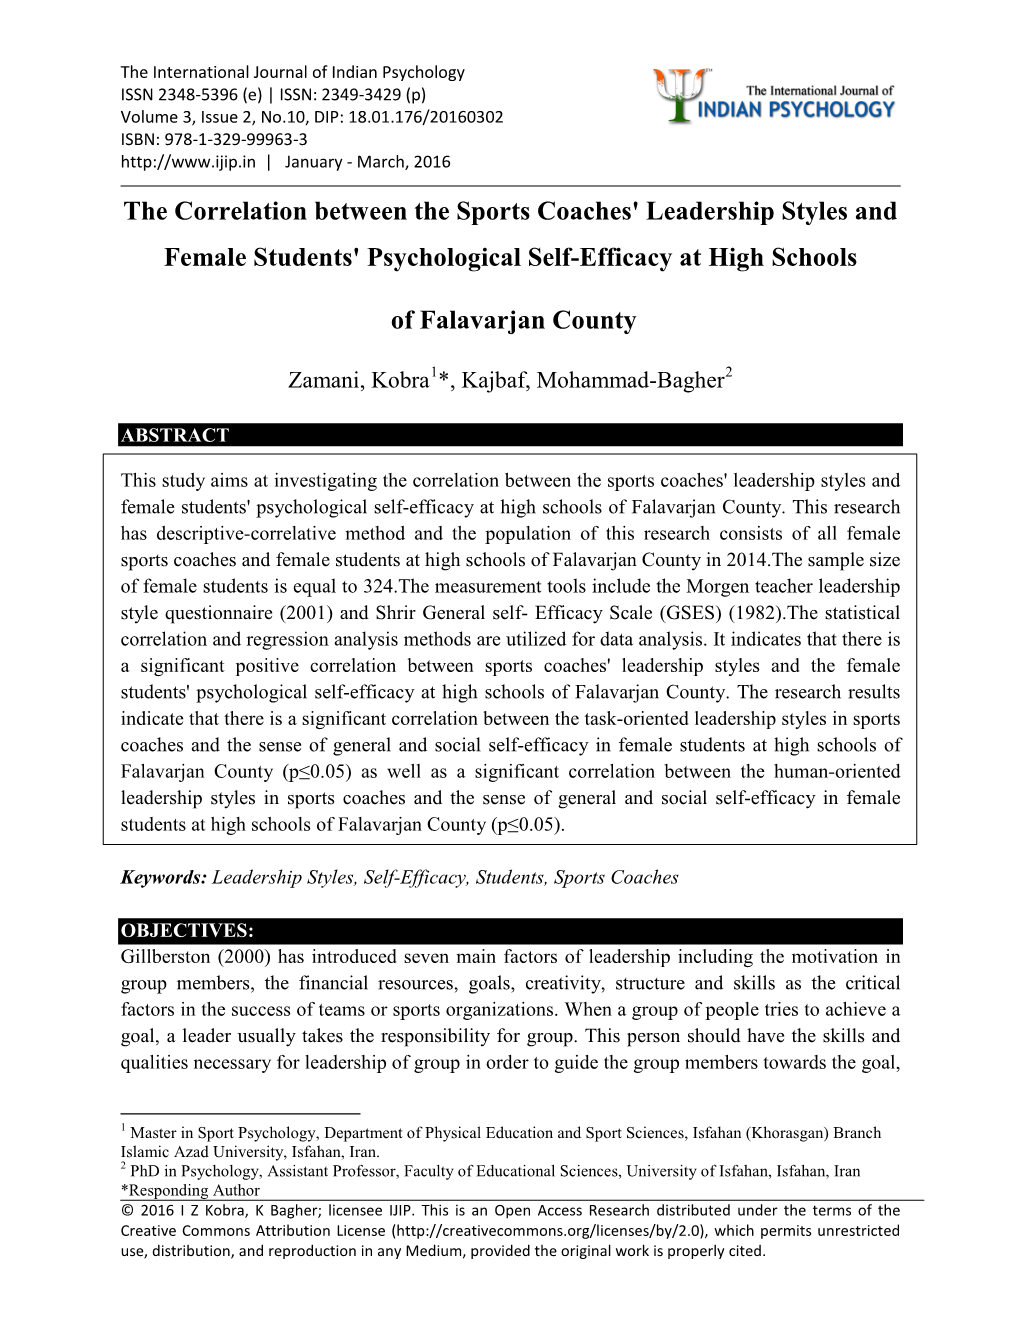 The Correlation Between the Sports Coaches' Leadership Styles and Female Students' Psychological Self-Efficacy at High Schools